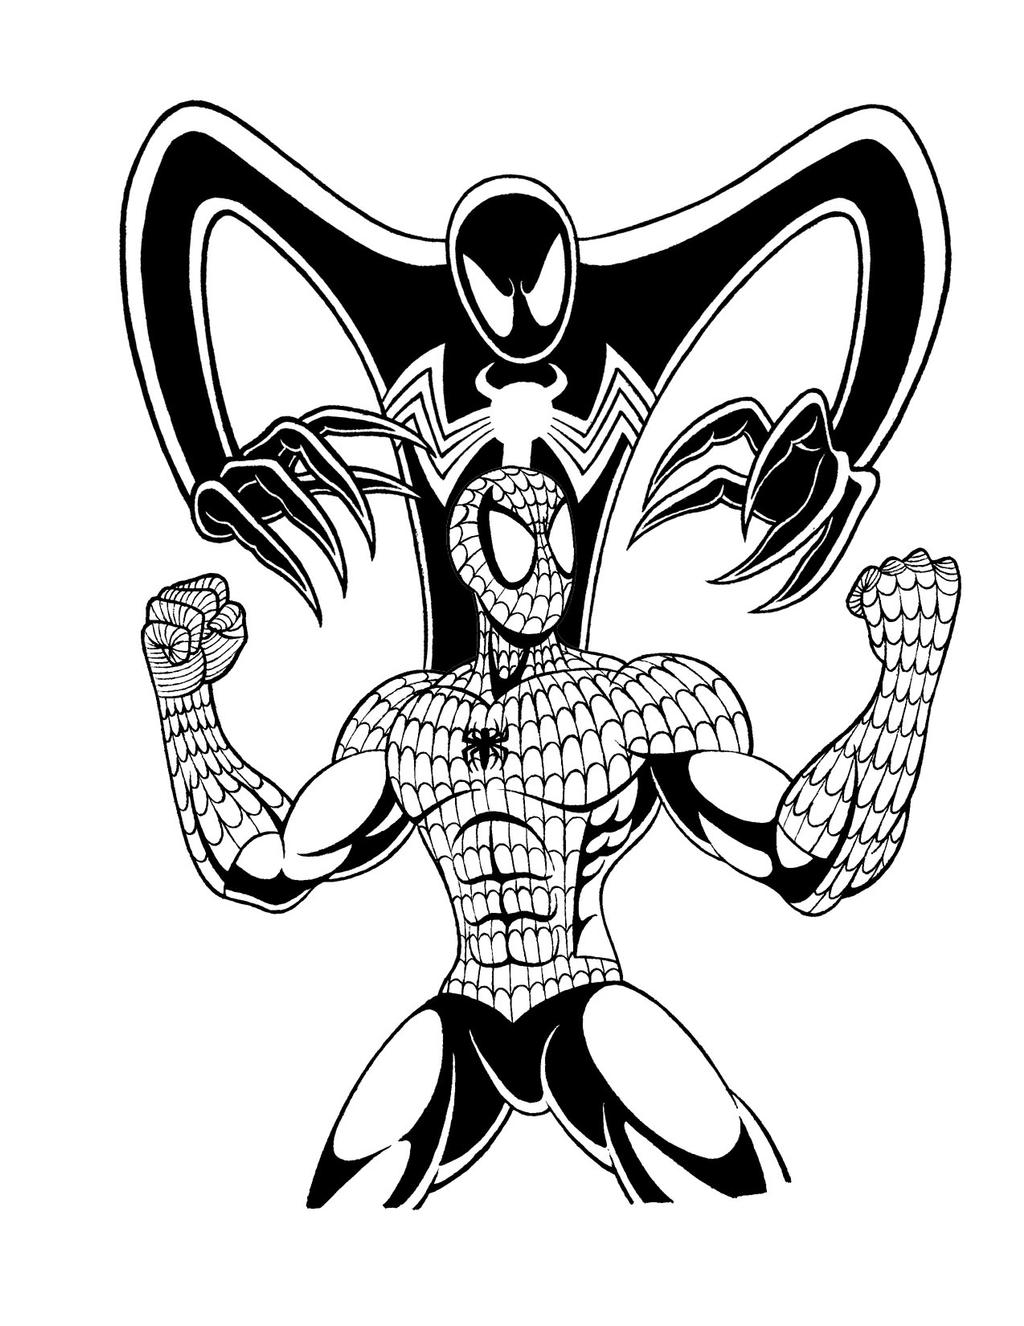 Spider-Man and Symbiote Tattoo Design by Mystic-Forces on DeviantArt